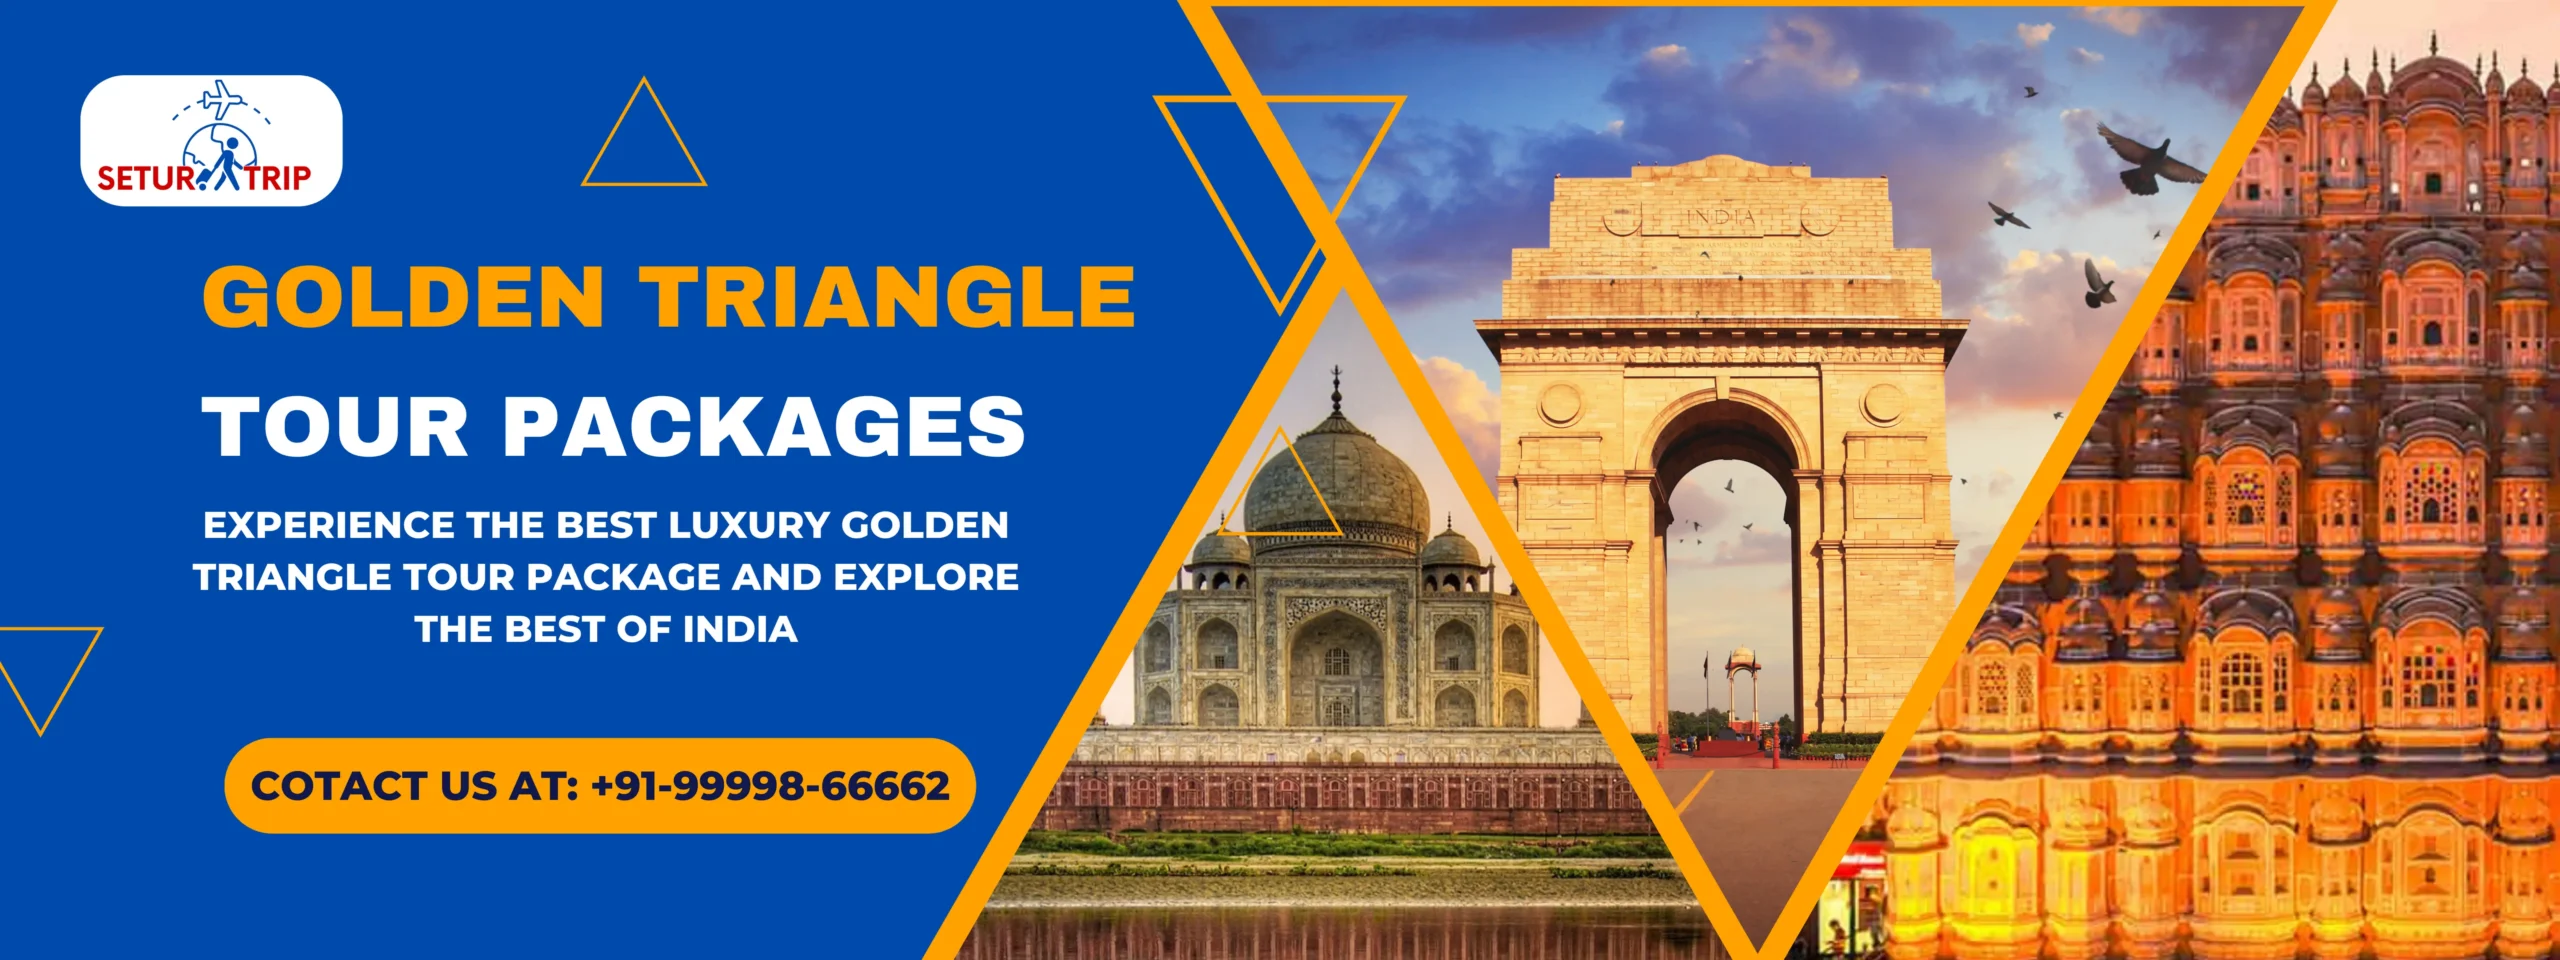 golden triangle tour packages by seturtrip